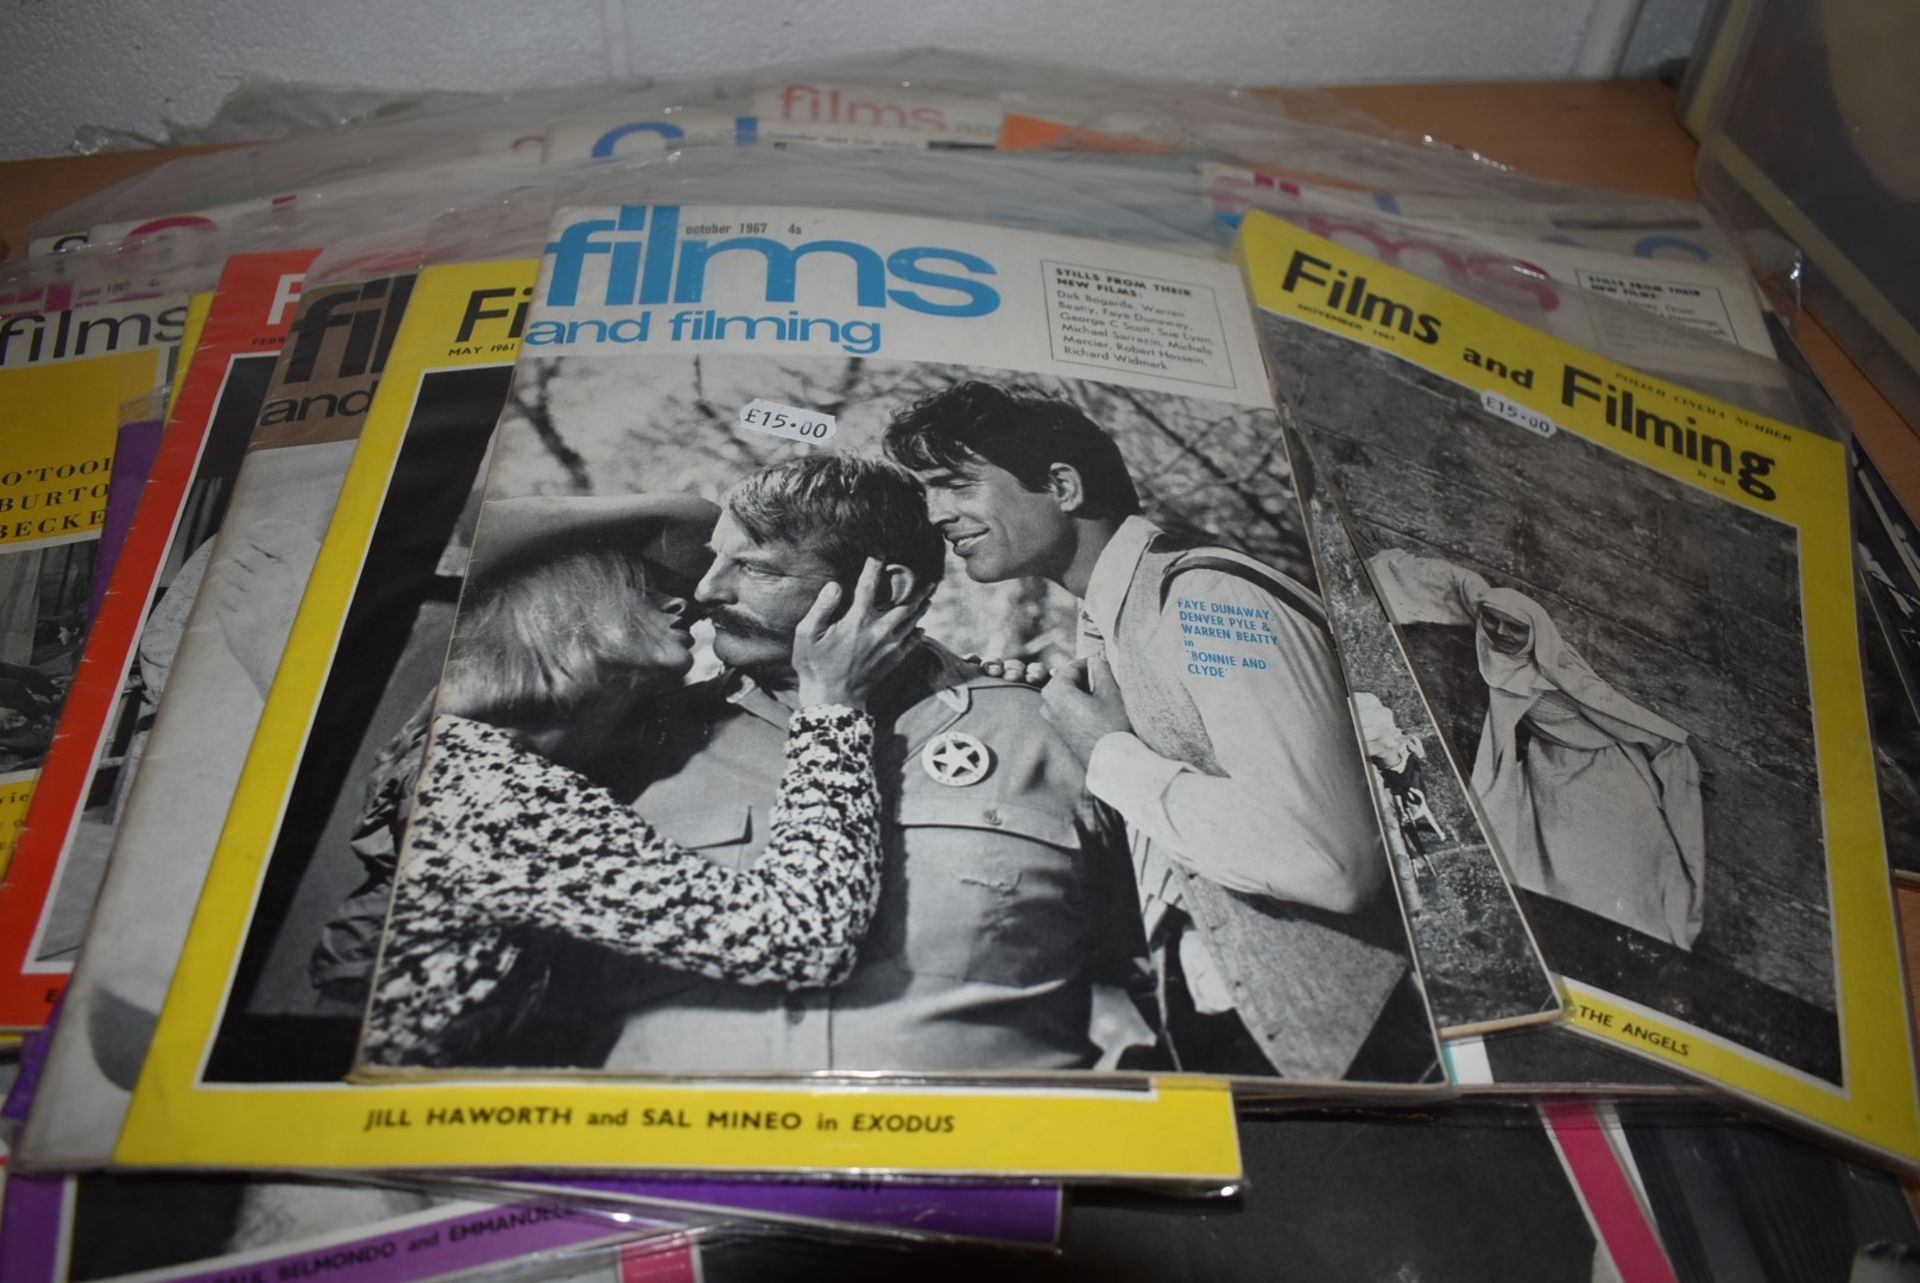 40 x Vintage 1960's Films and Filming Magazines - Dated 1961 to 1968 - Ref MB152 - CL431 - Location: - Image 12 of 17